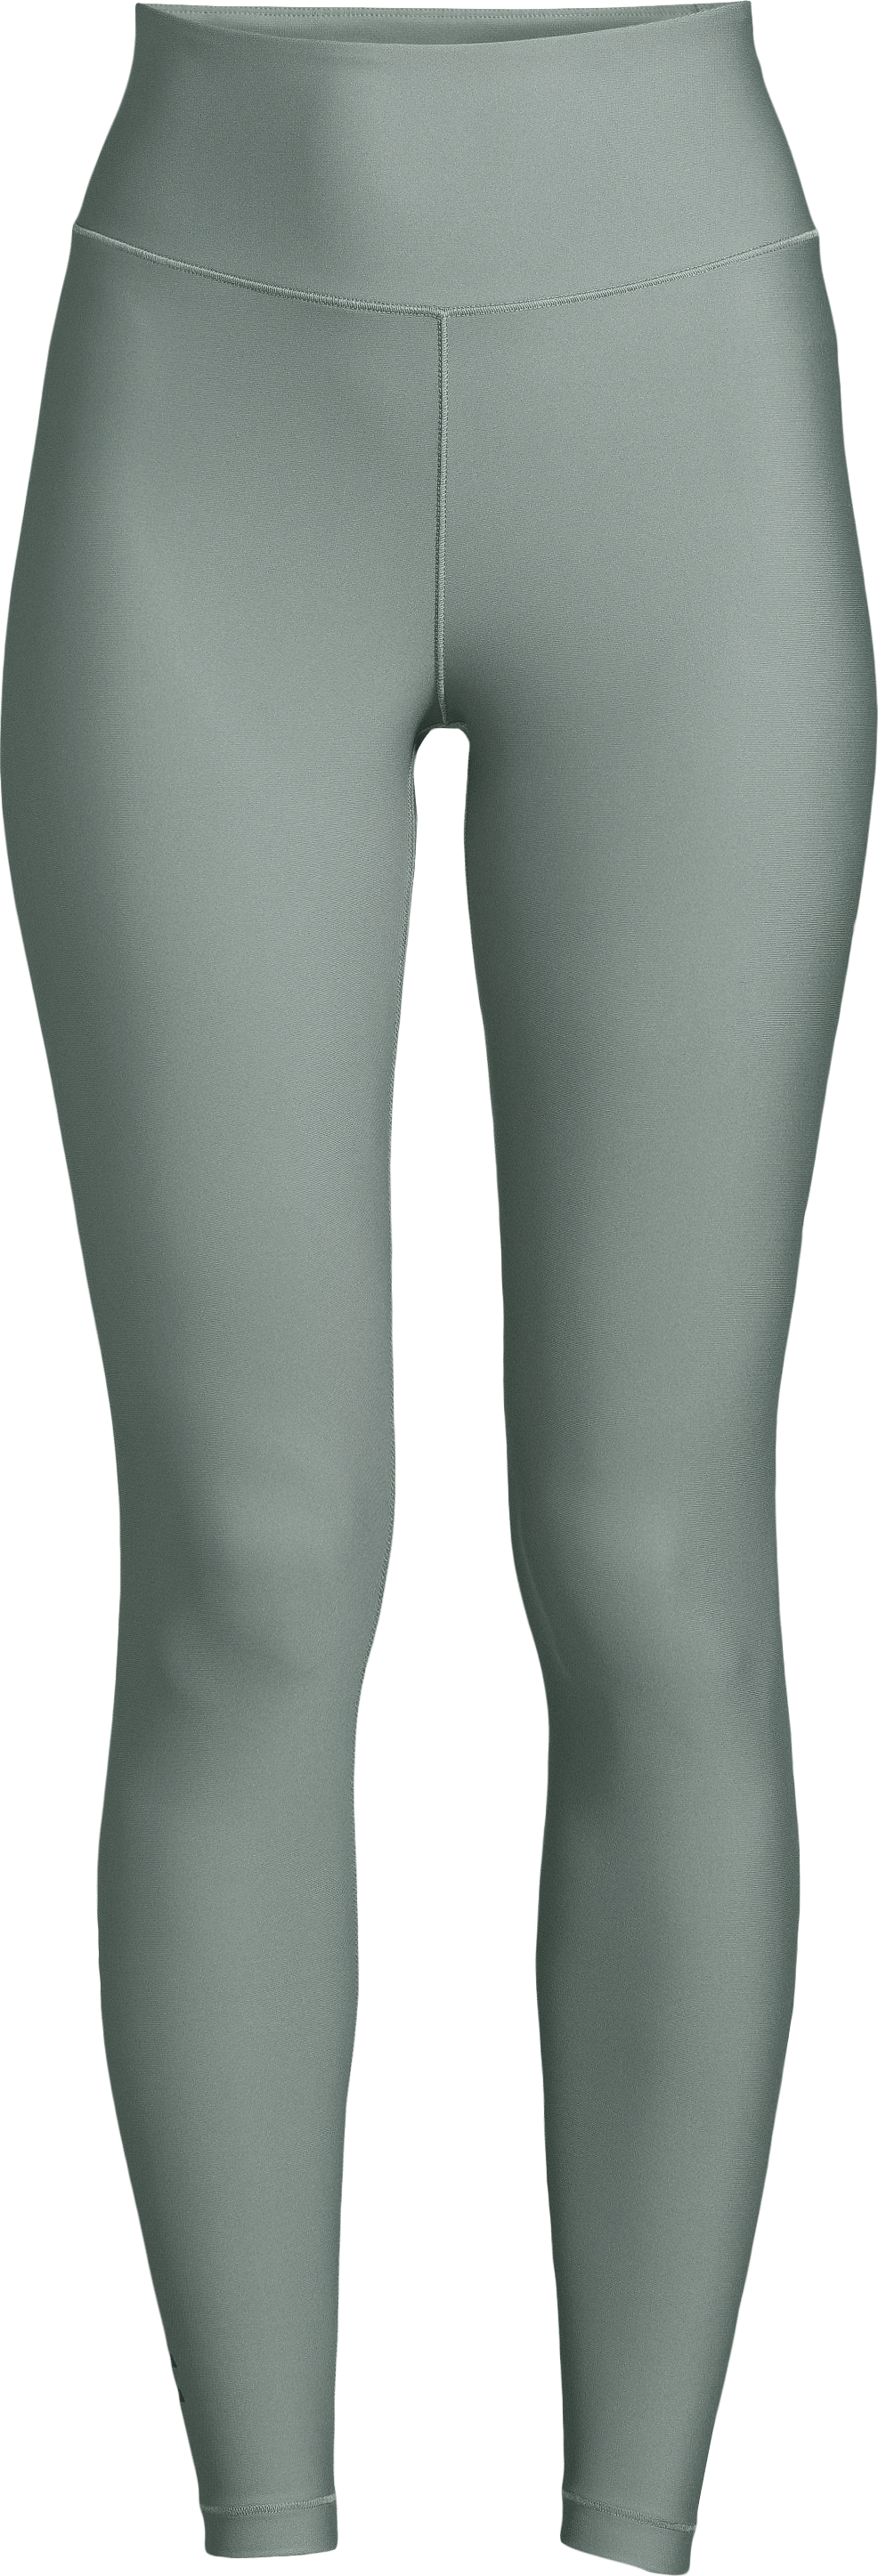 Women's Graphic Sport Tights Dusty Green